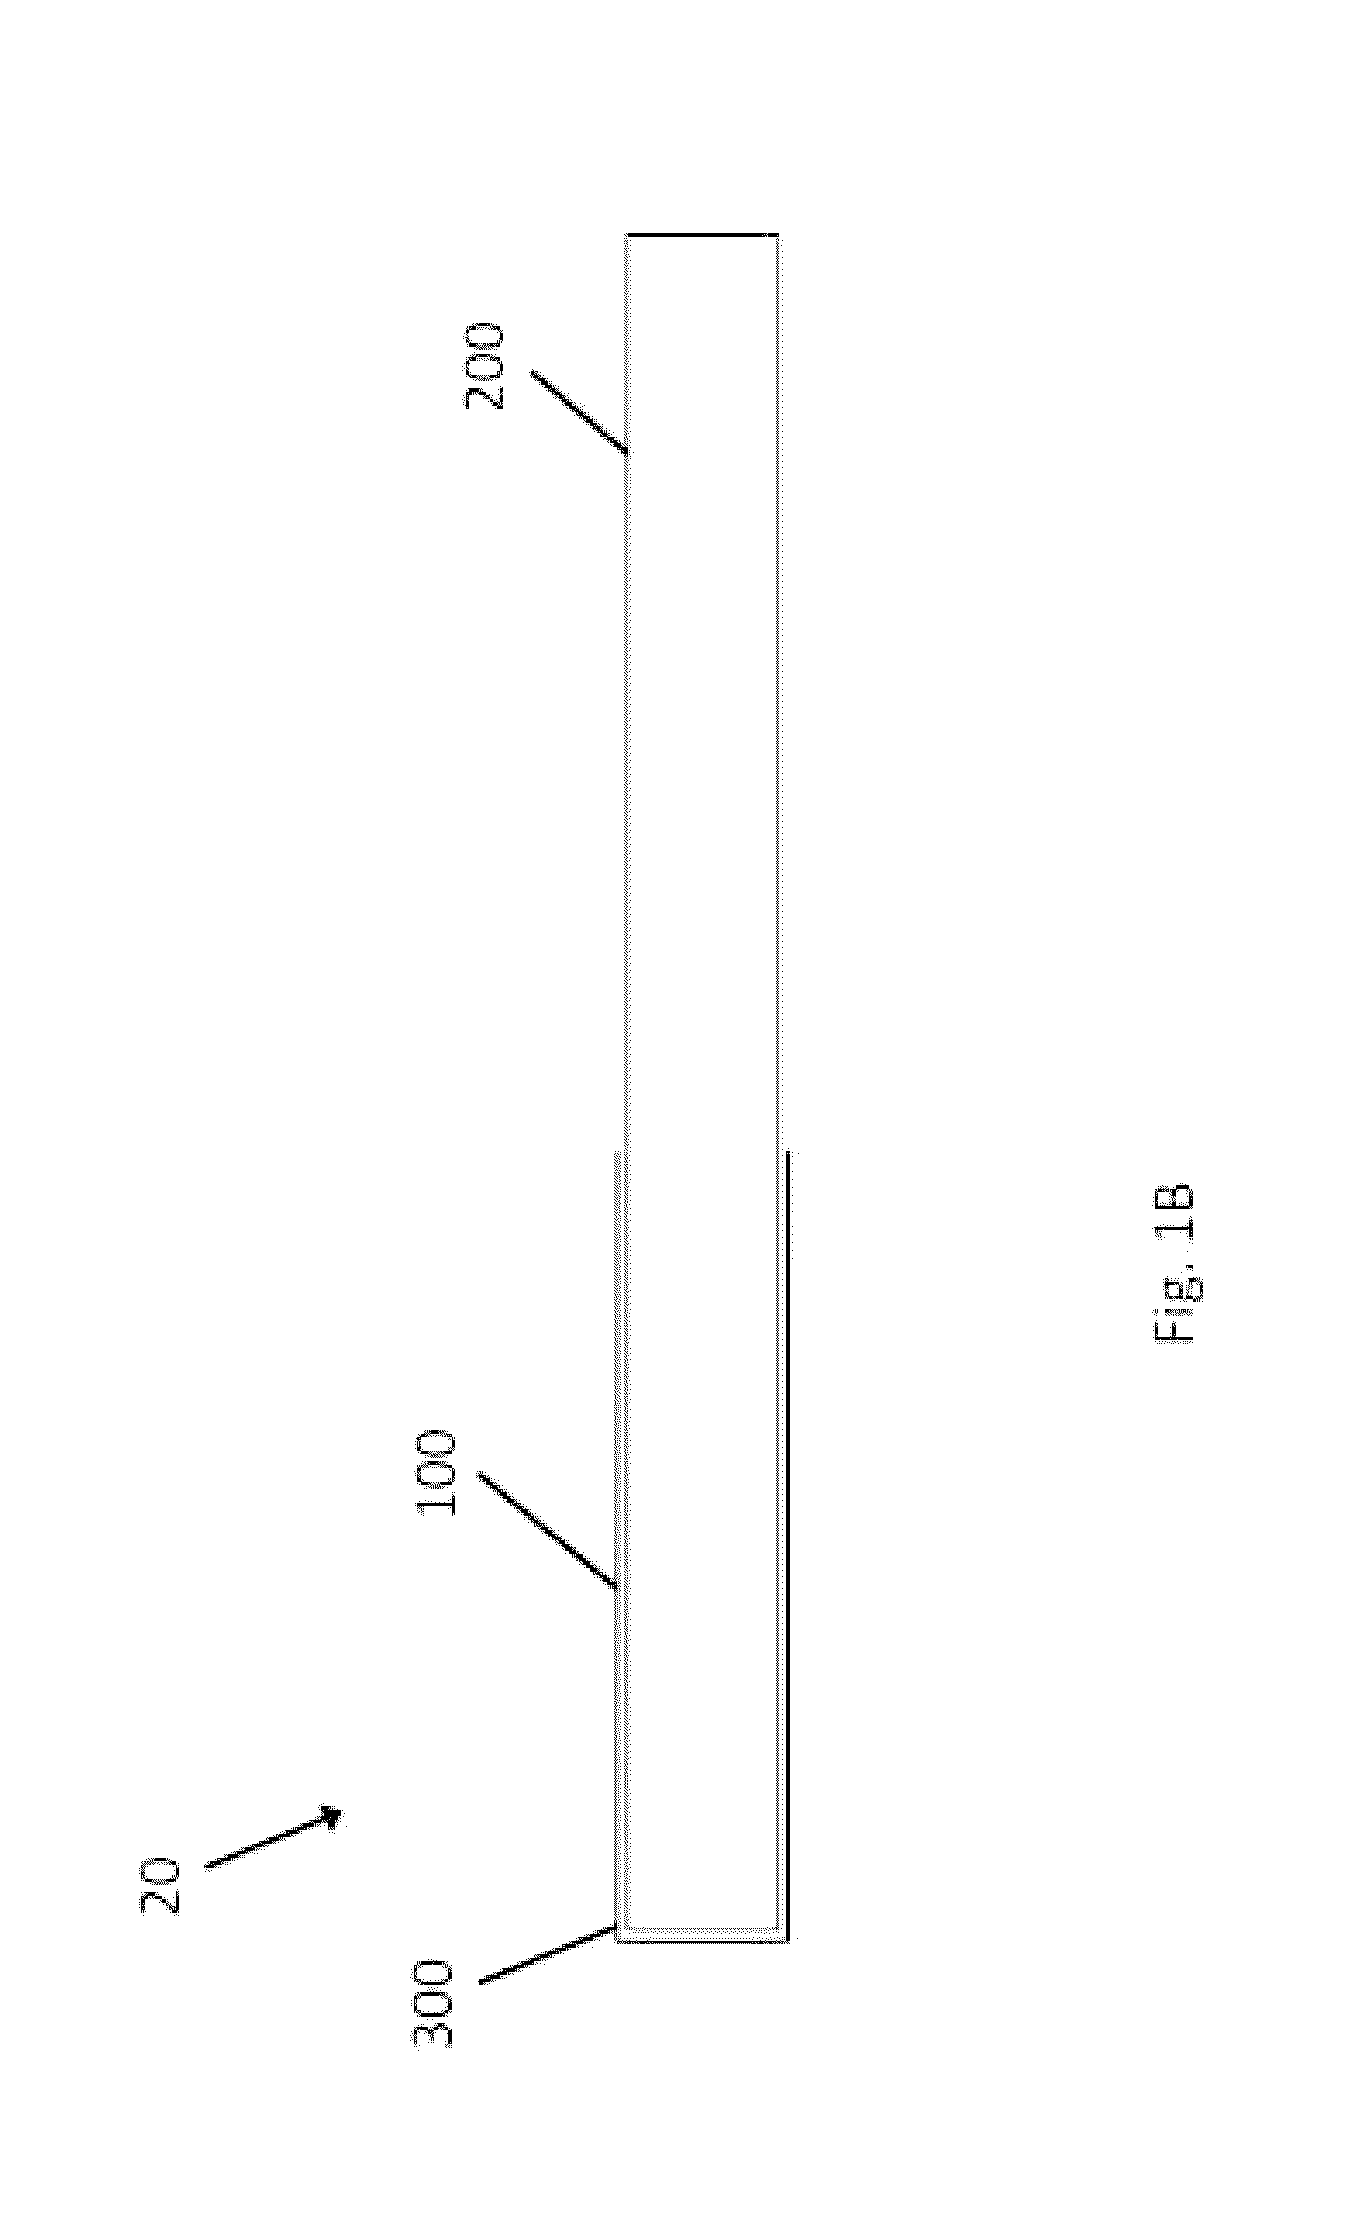 Vascular treatment devices and methods